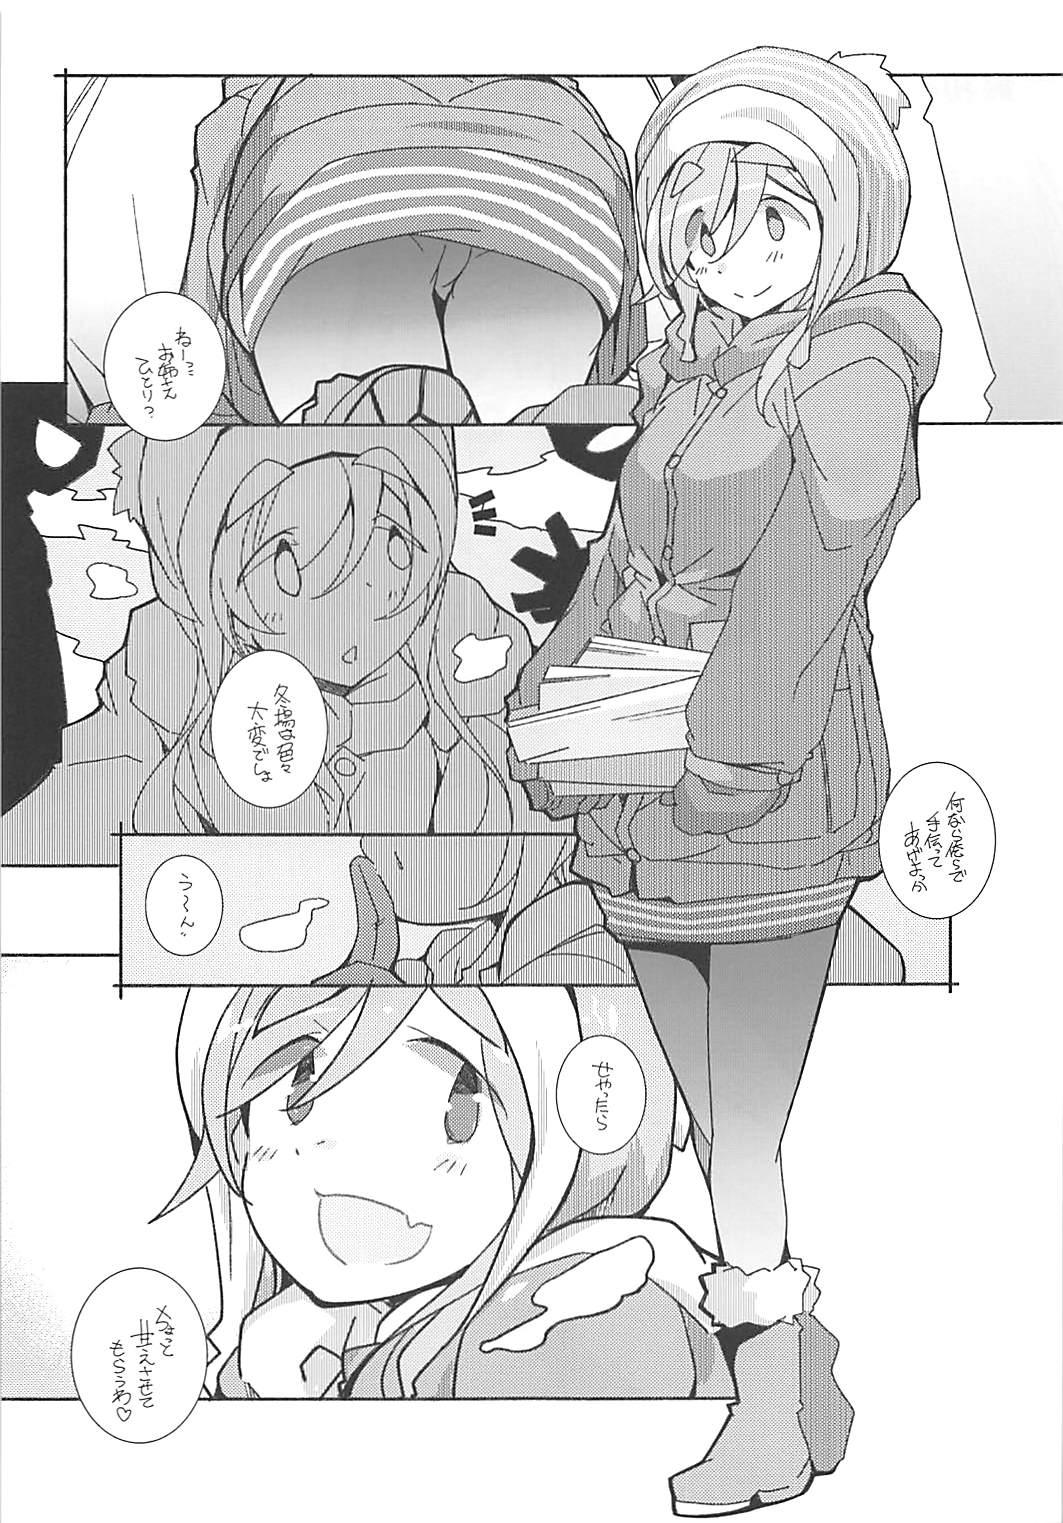 Chacal Cam - Yuru camp Stepbrother - Page 4